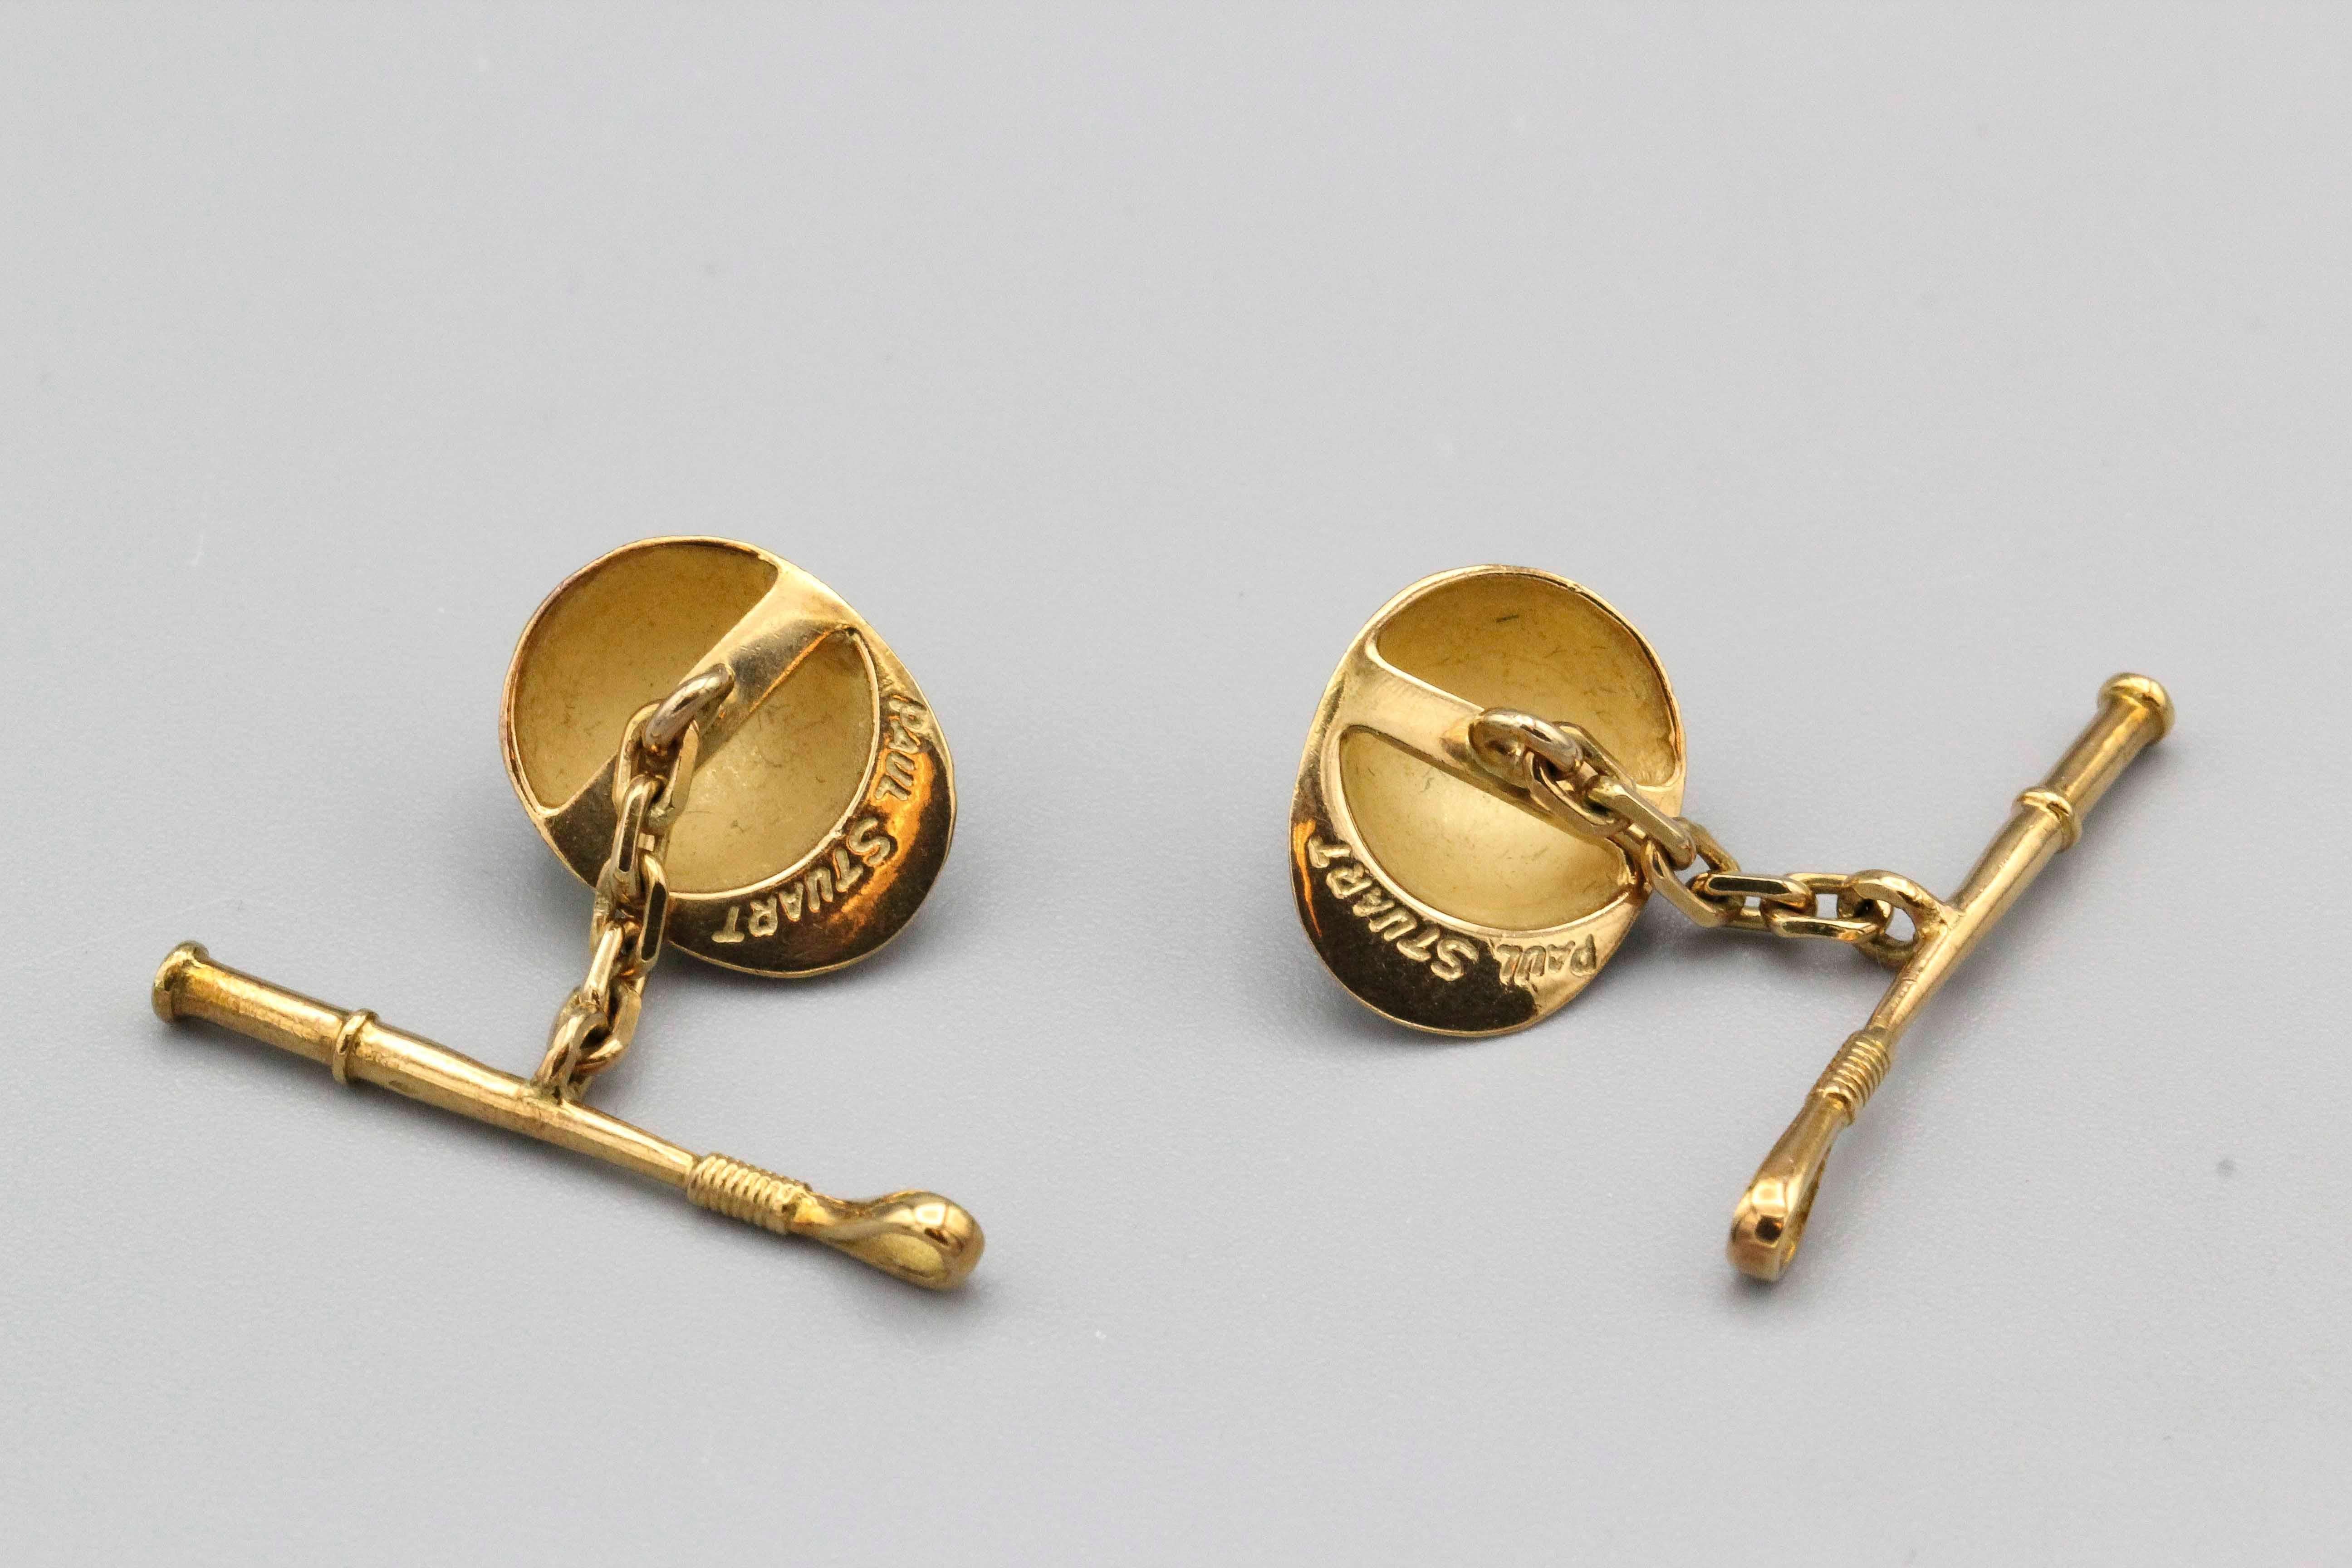 Fine pair of Paul Stuart 18k gold Equestrian motif cufflinks.  The cufflinks feature a yellow and blue enamel jockey hat on one end and a riding whip on the other. With original box.

Hallmarks: Paul Stuart, French 18k gold assay marks, maker's mark.